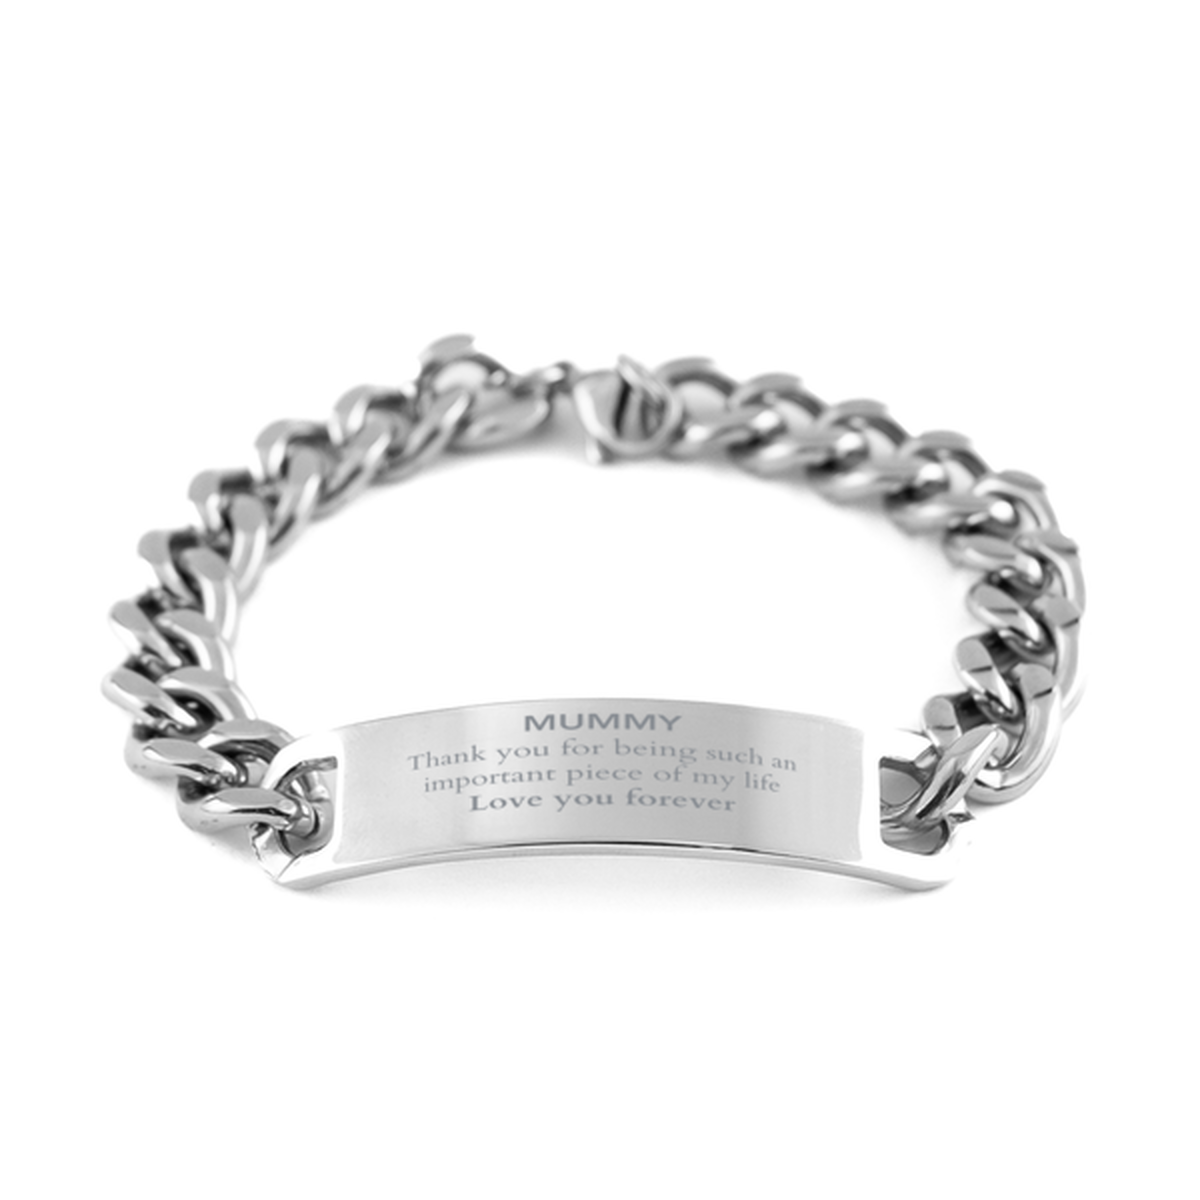 Appropriate Mummy Cuban Chain Stainless Steel Bracelet Epic Birthday Gifts for Mummy Thank you for being such an important piece of my life Mummy Christmas Mothers Fathers Day